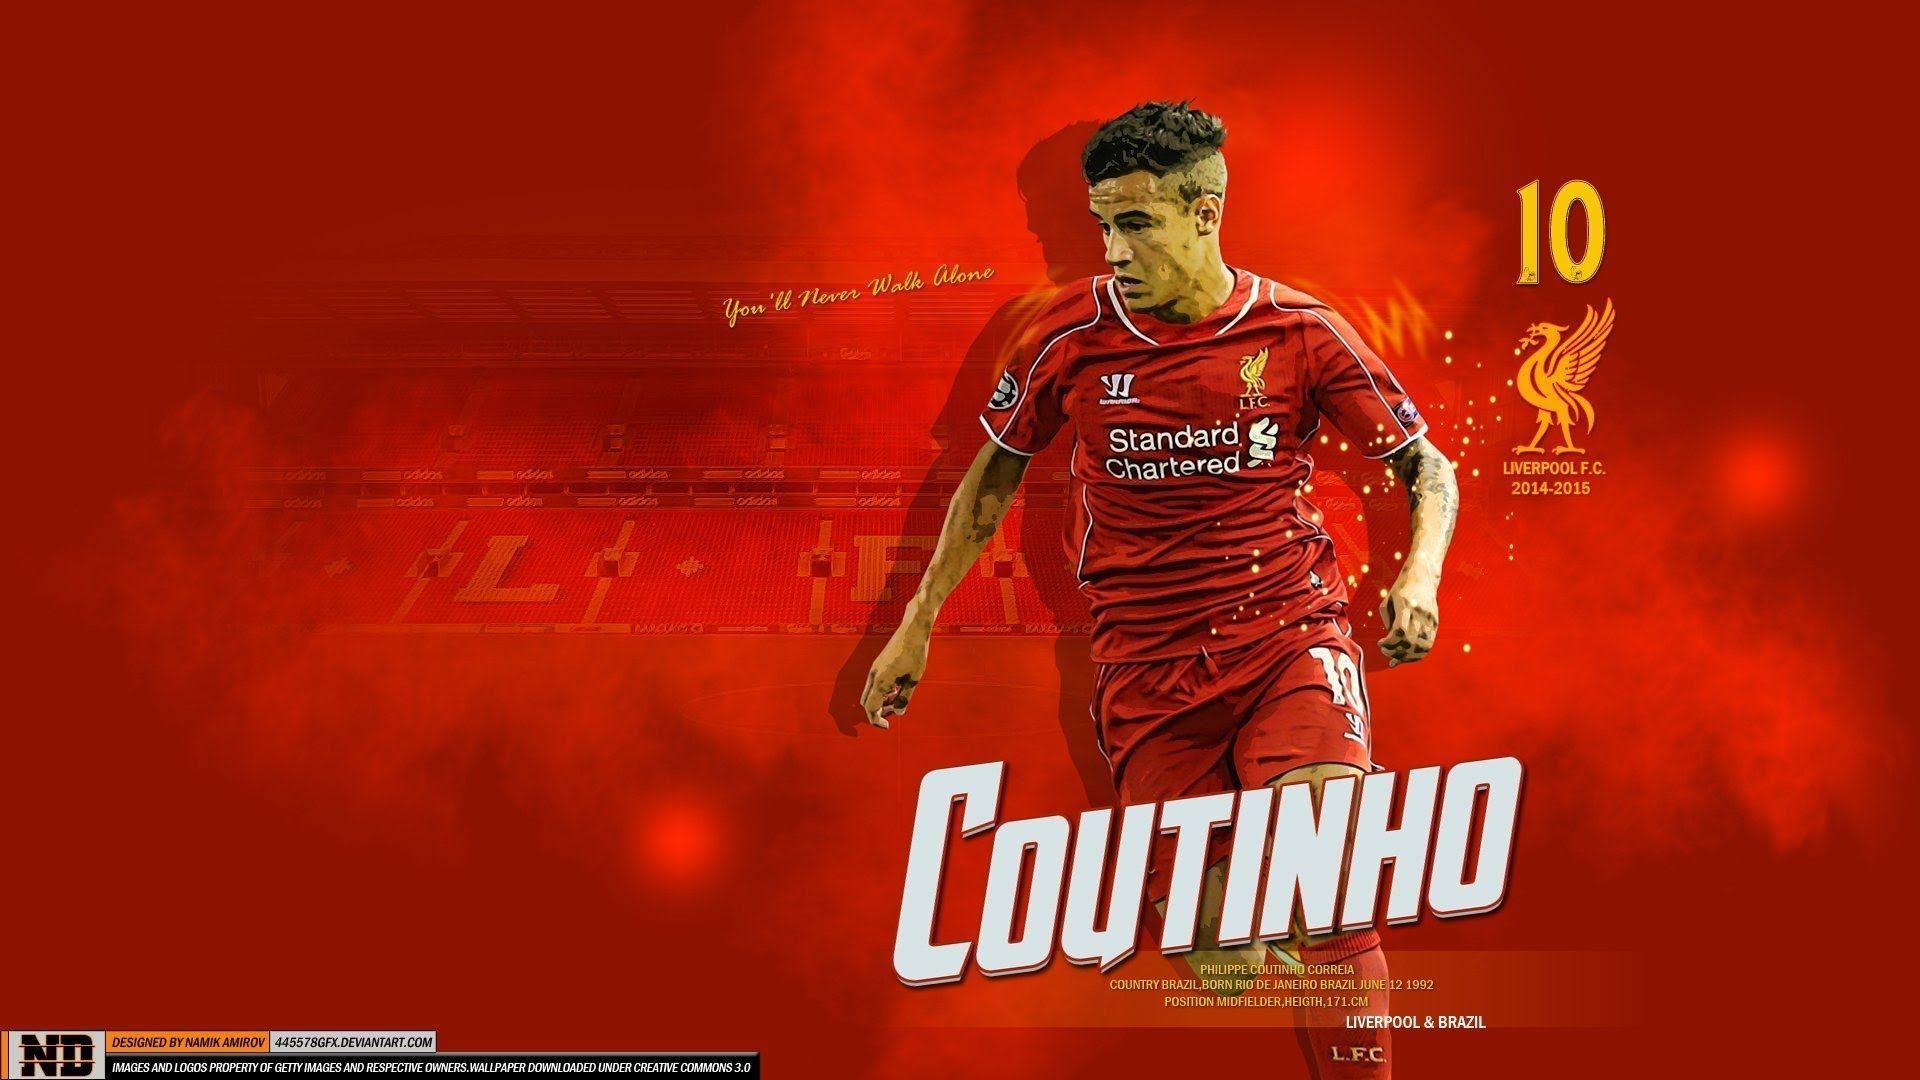 Philippe Coutinho. The Magician. Liverpool FC